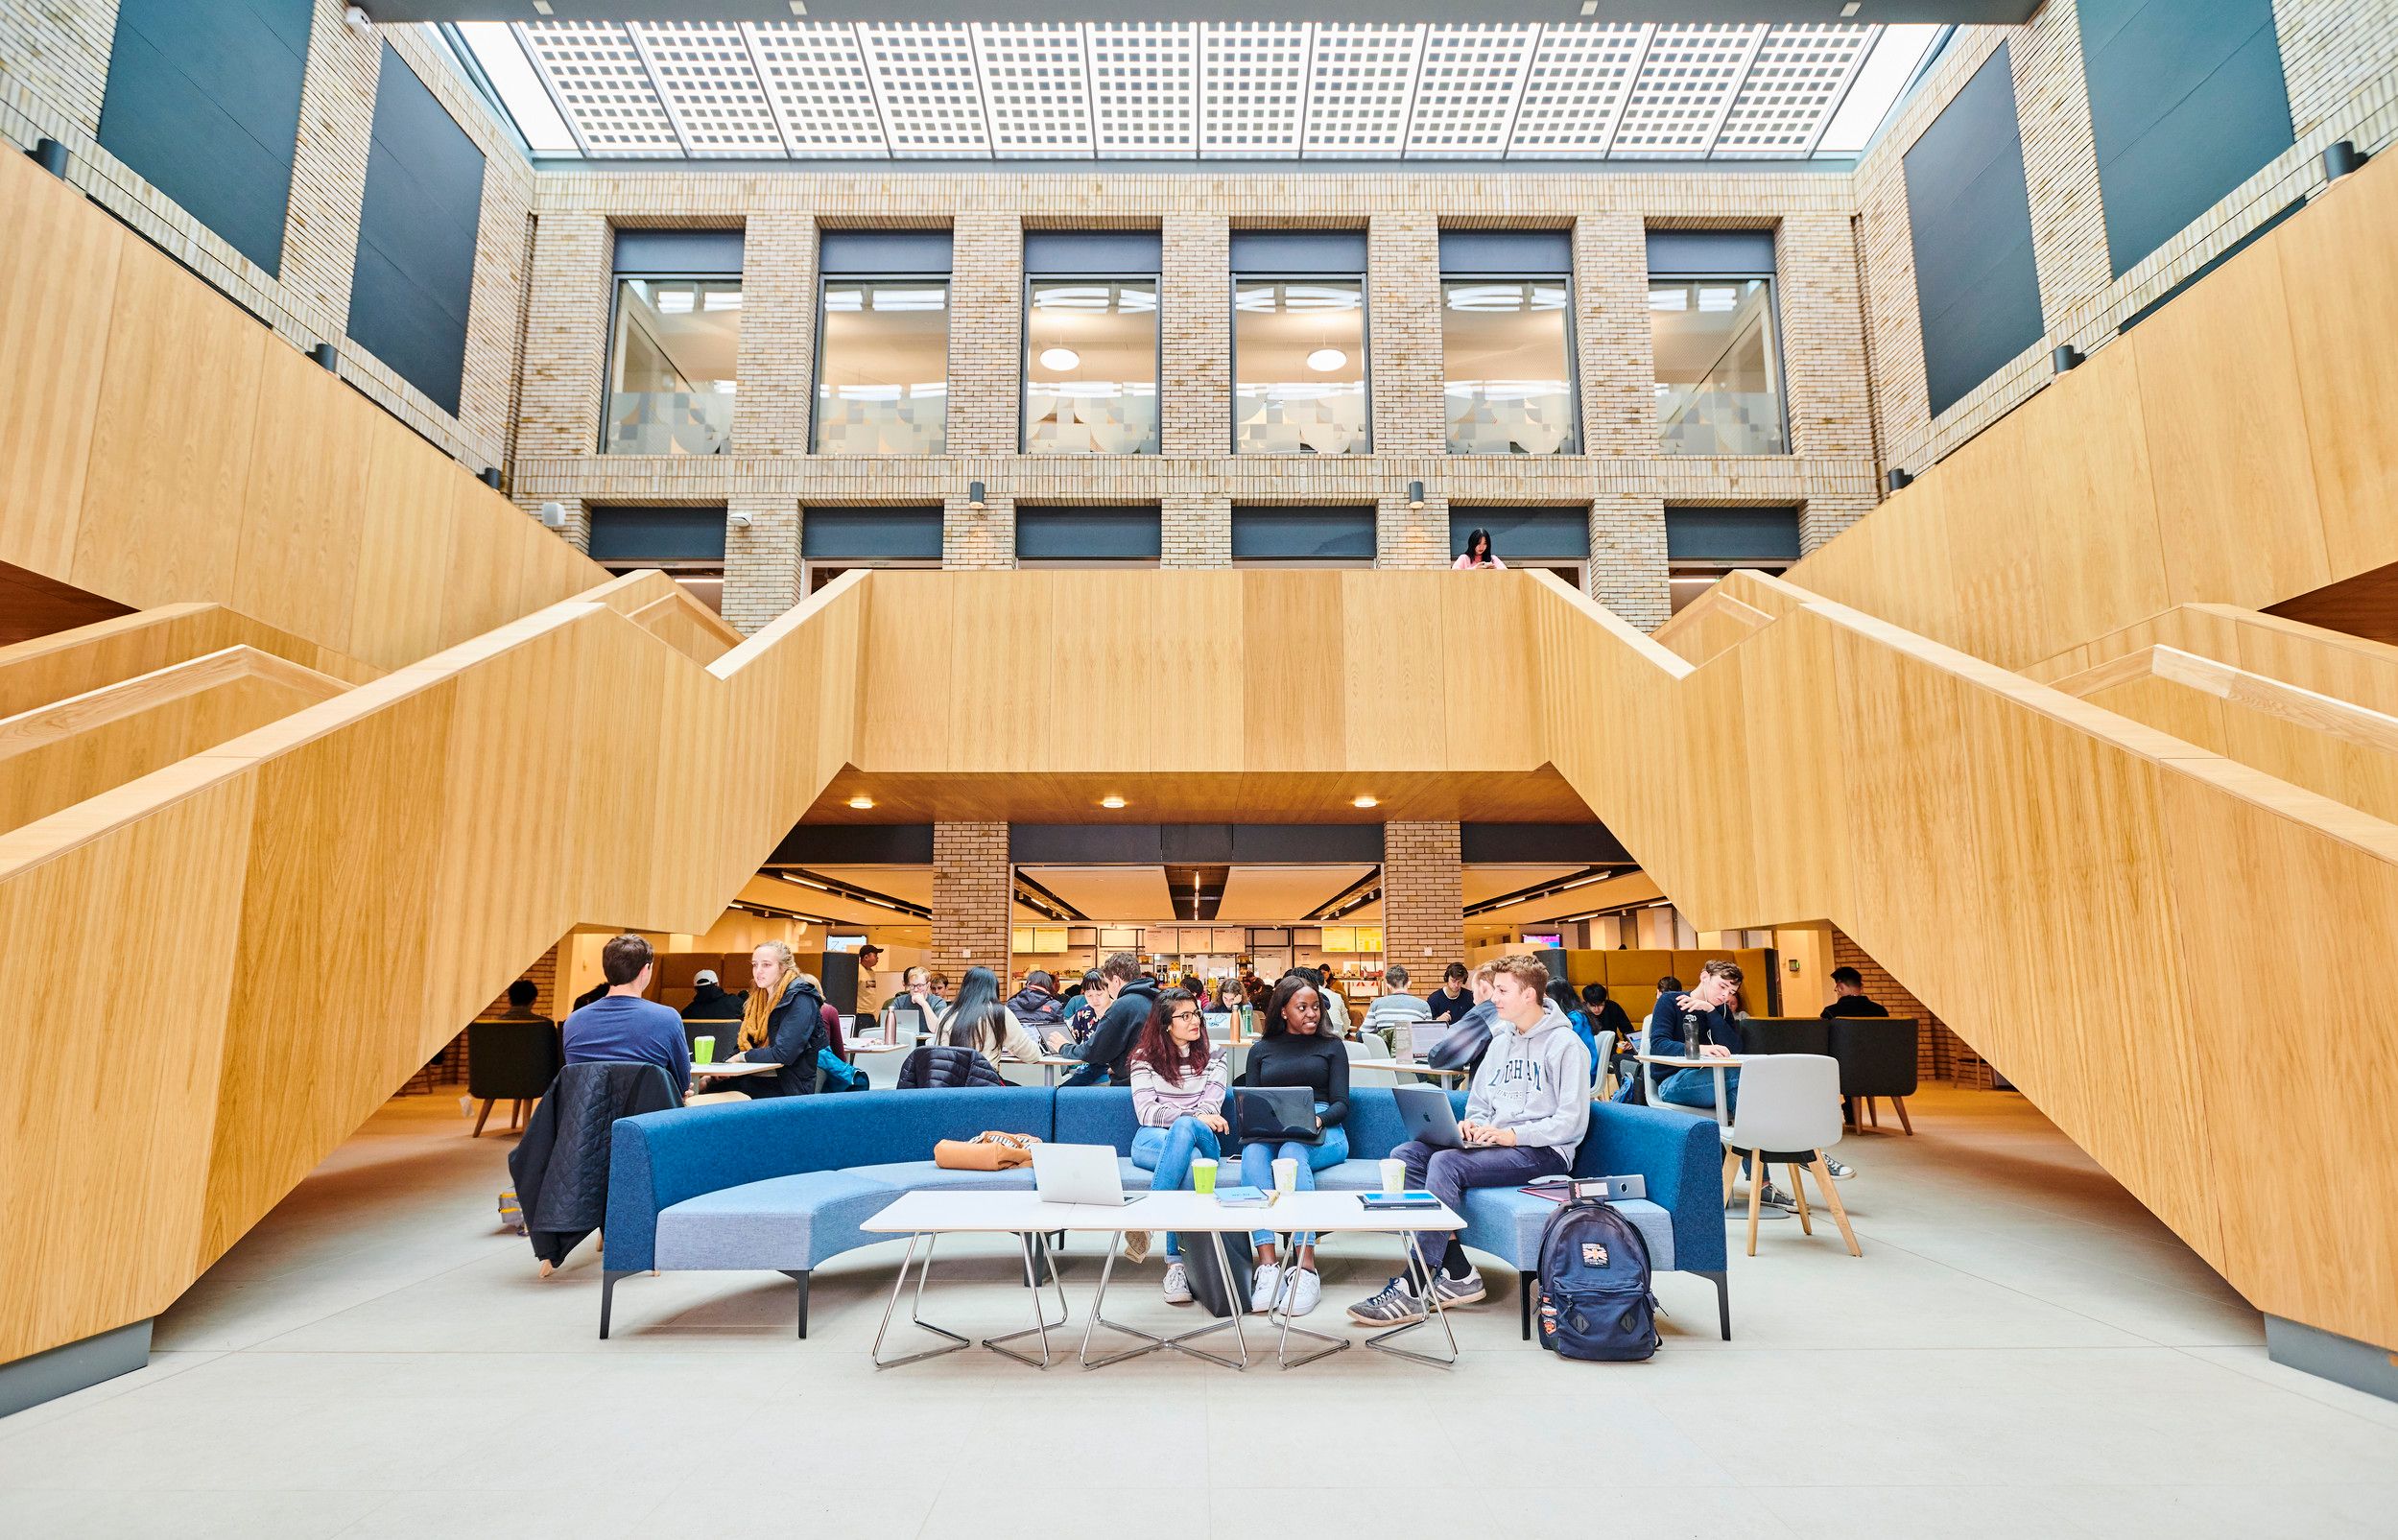 Students in the Teaching and Learning Centre